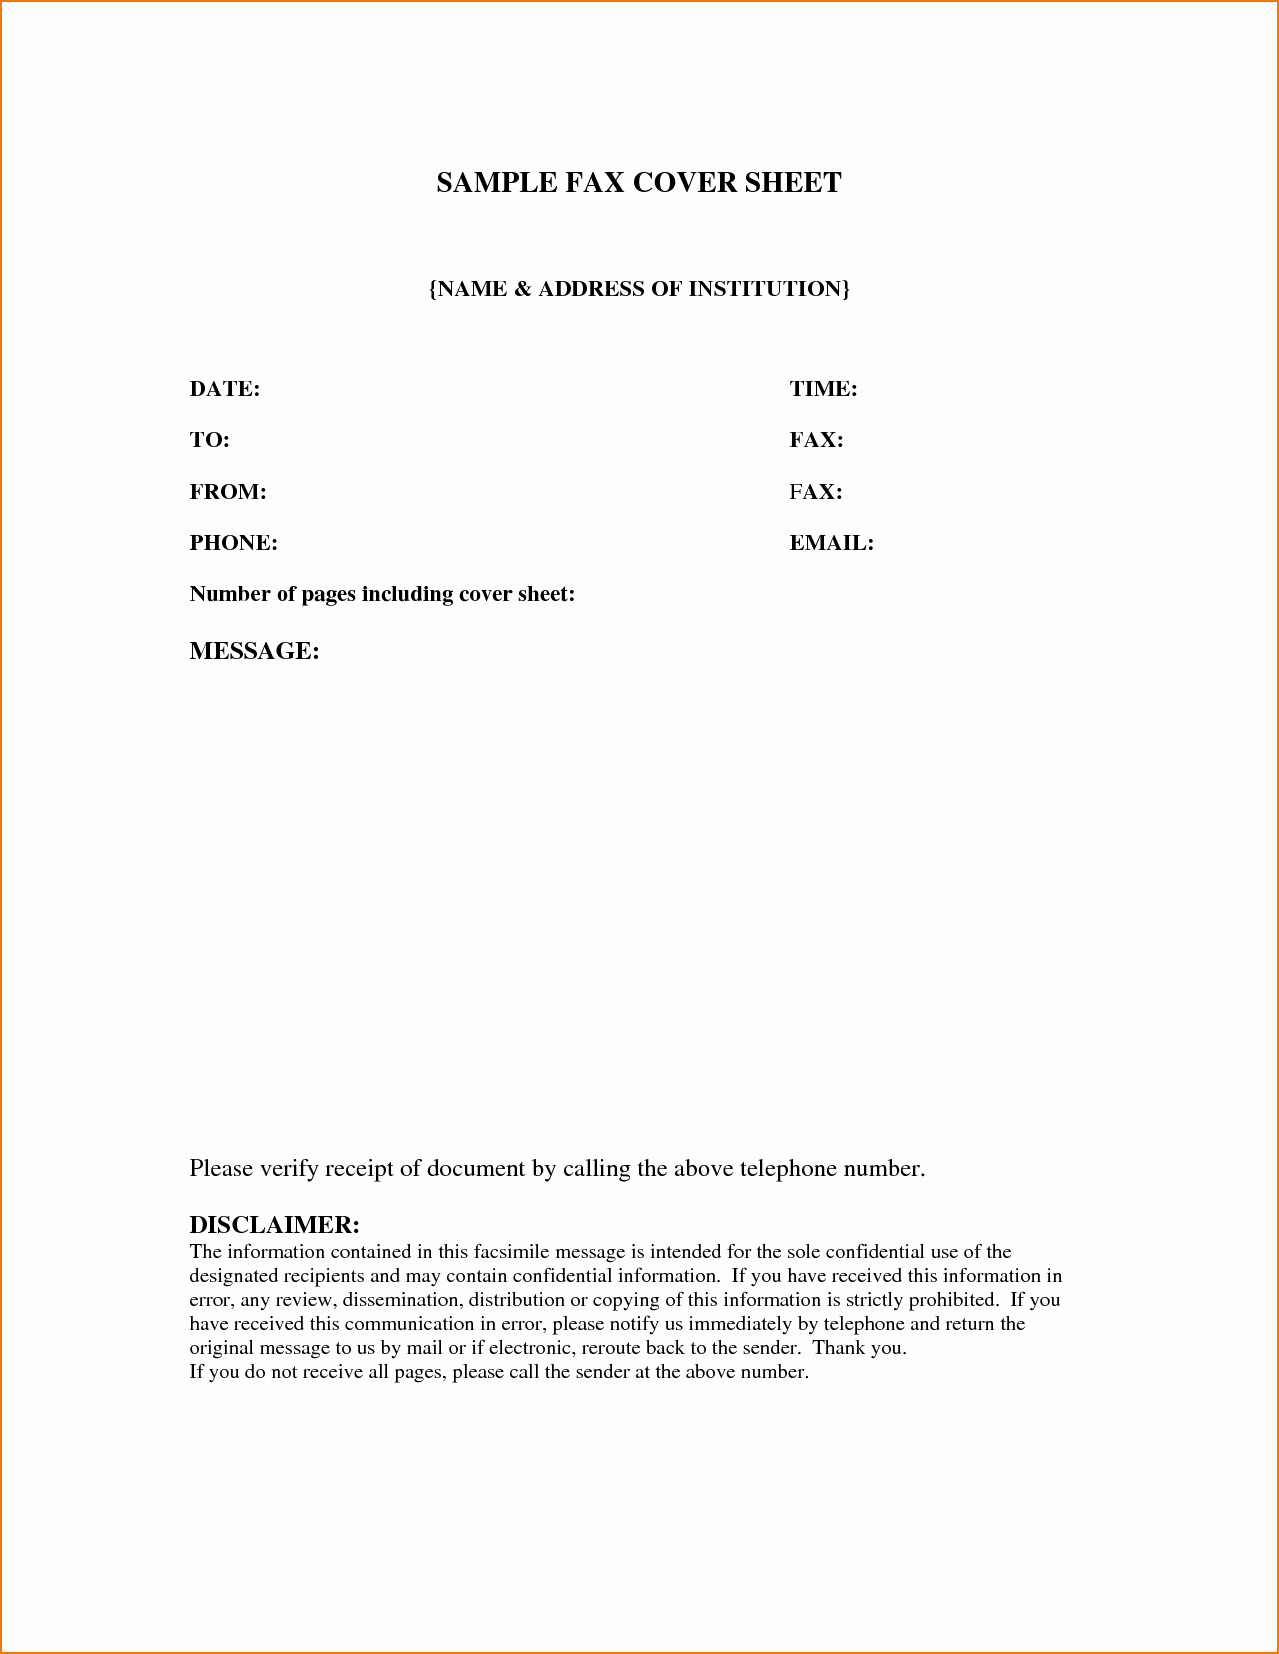 Sample Of Fax Cover Sheets Fresh 6 Fax Cover Sheet Sample